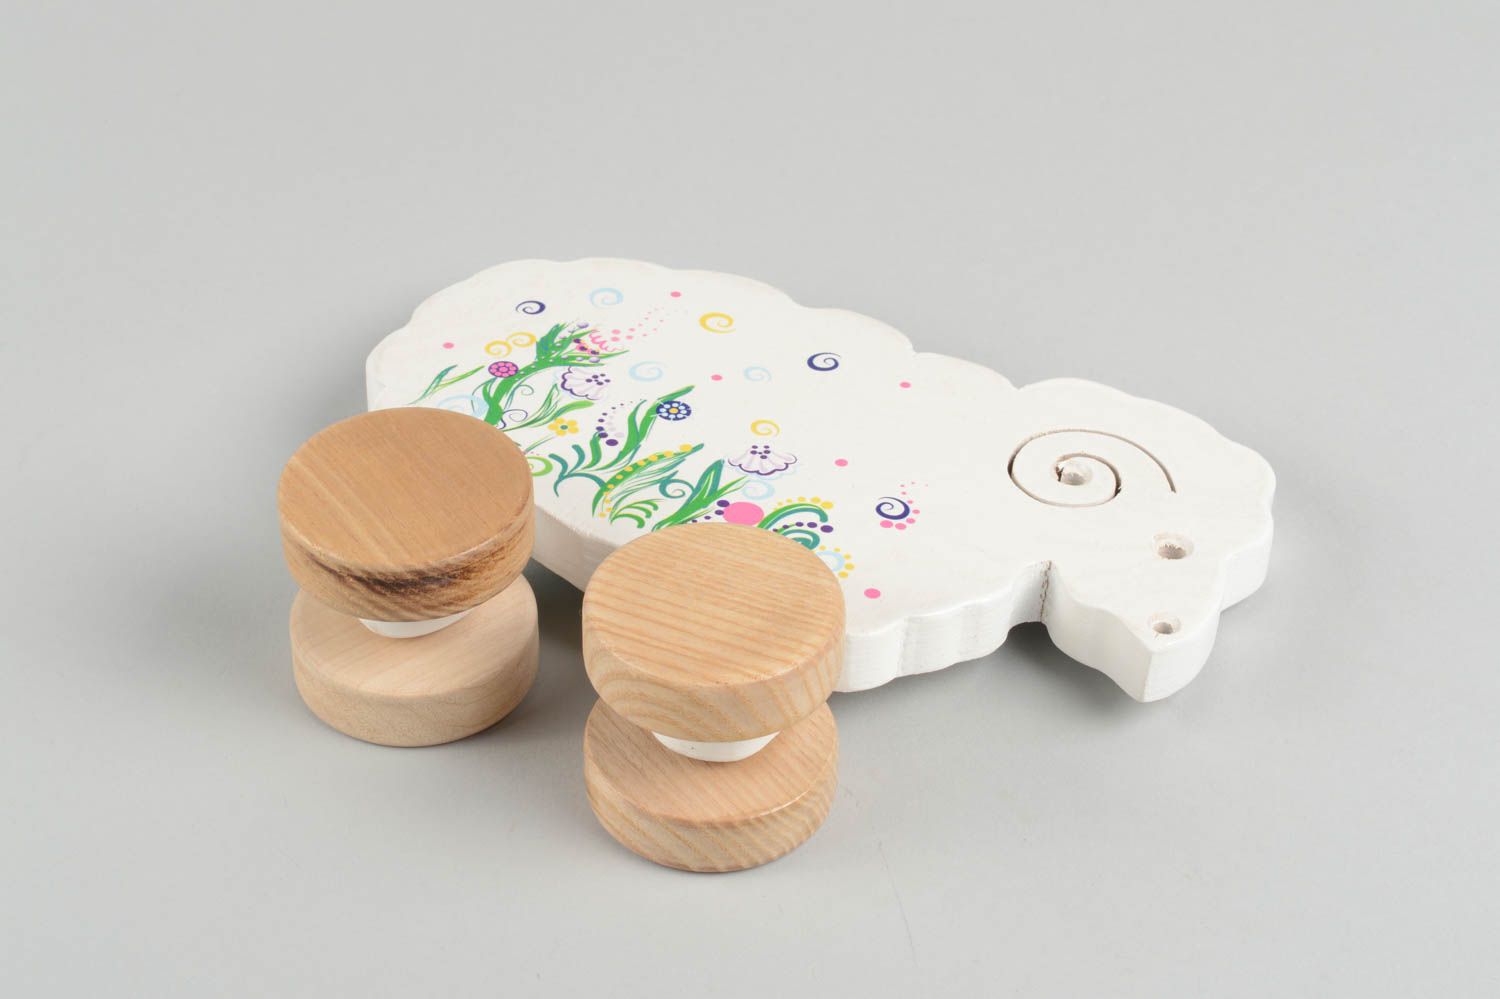 Handmade interior decor toy made of natural materials designer wooden toy photo 4